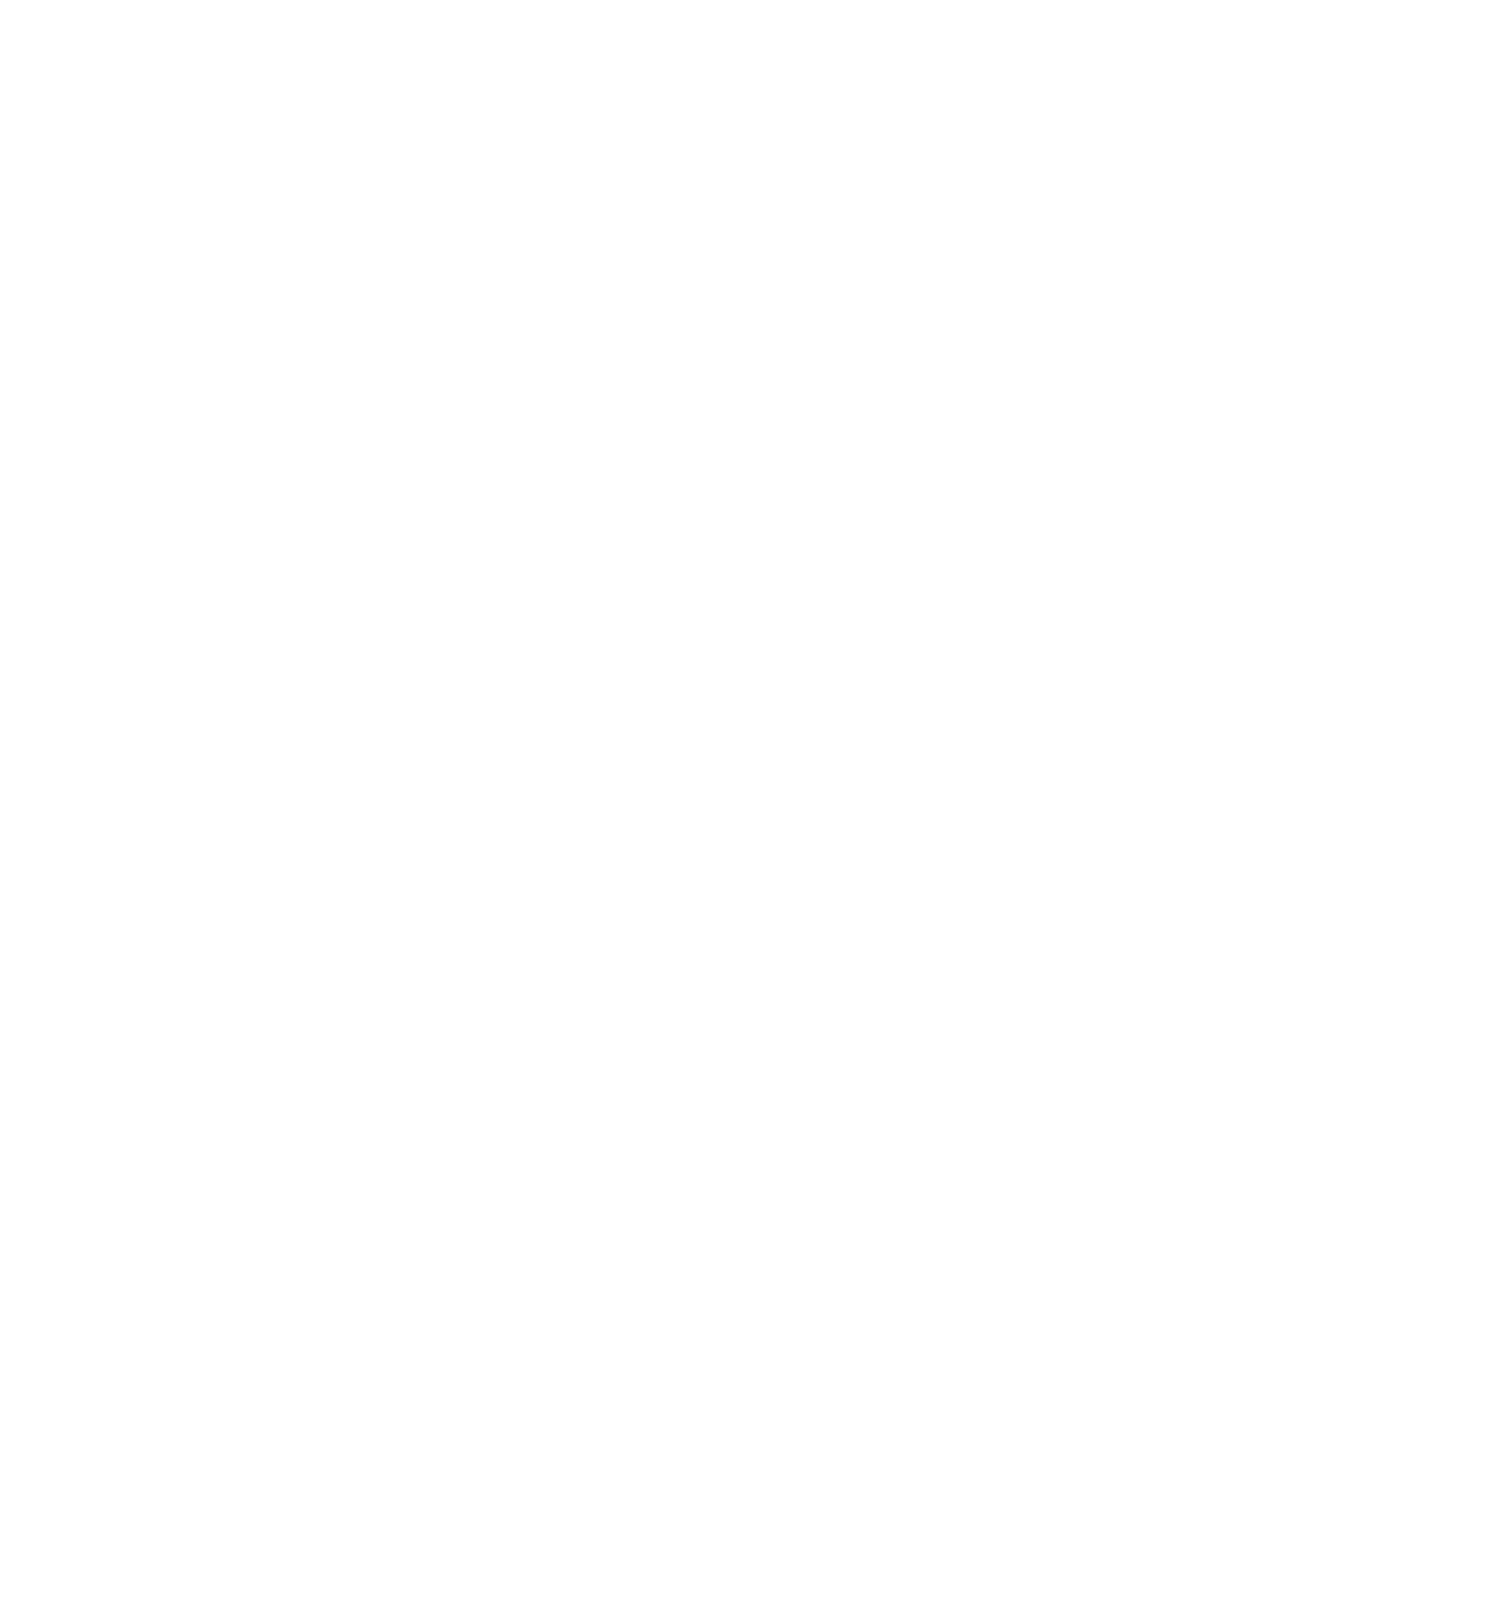 Calm N' Healing Counseling - Home - Facebook